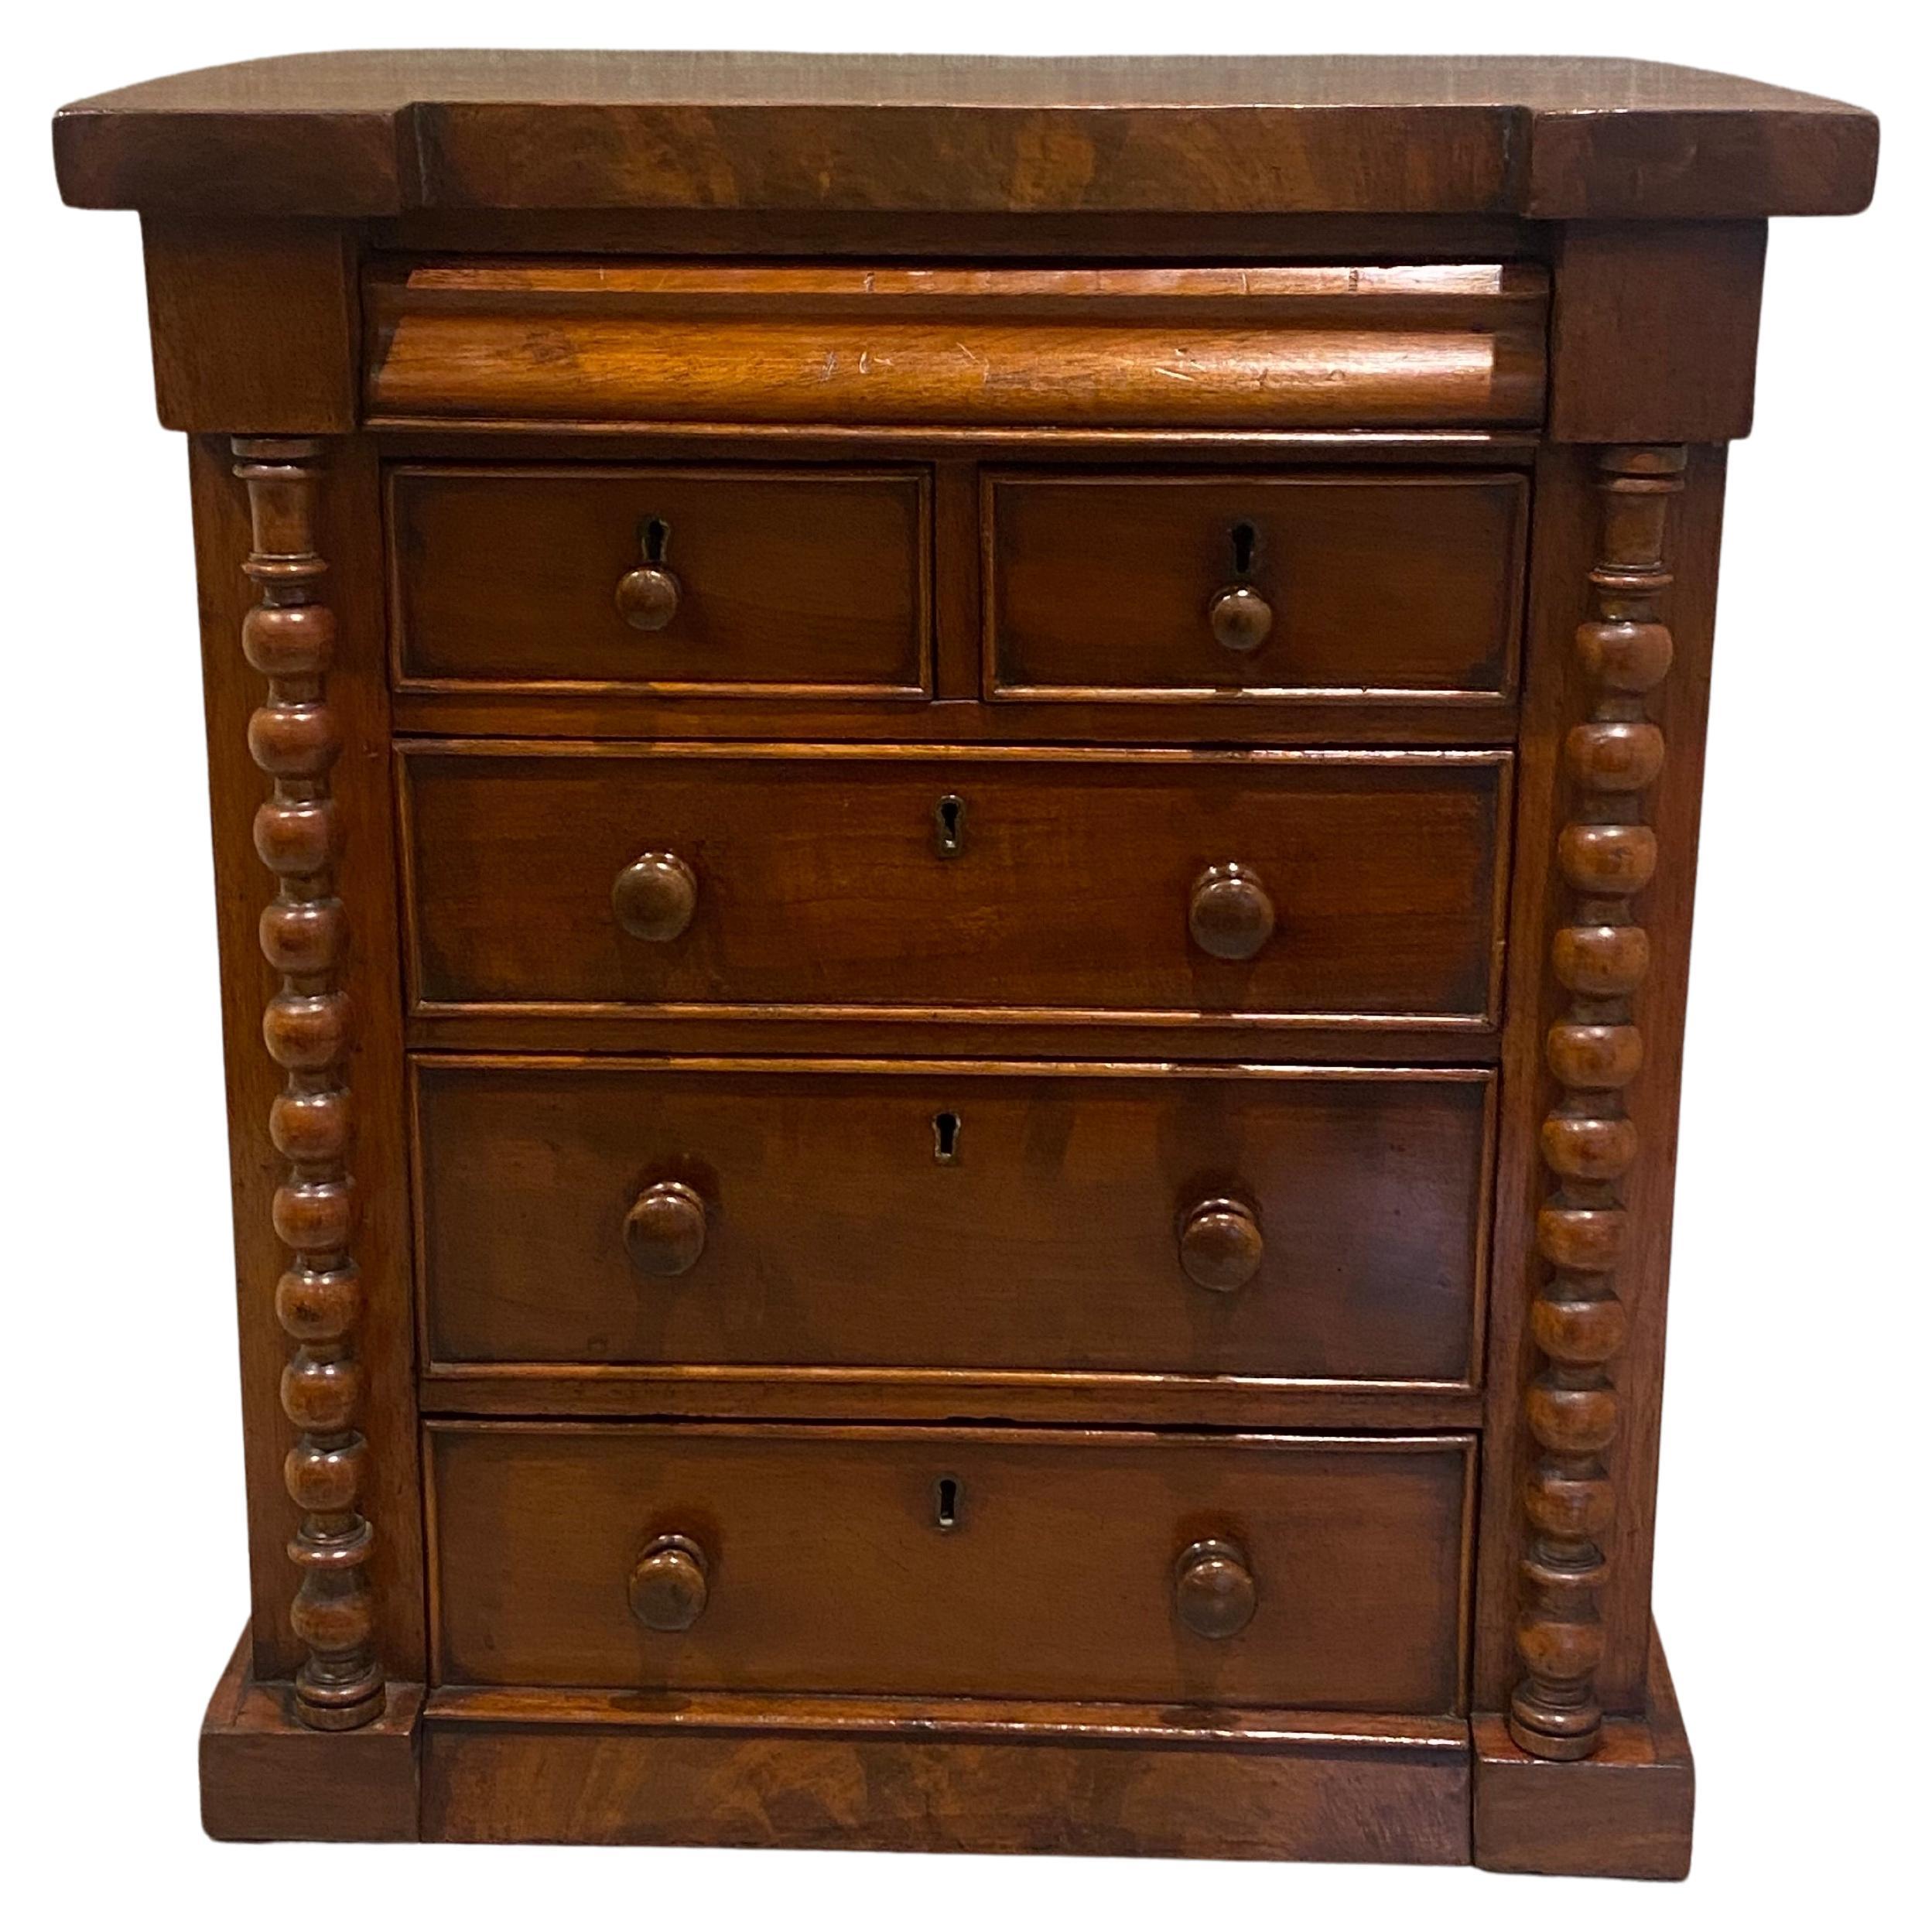 A Very rare Scottish antique chest of drawers having two barley-twist columns flanking each side, 3 large drawers 2 small upper drawers and there is another hidden secret drawer at the very top. This Superb Collectors Chest is in very good condition